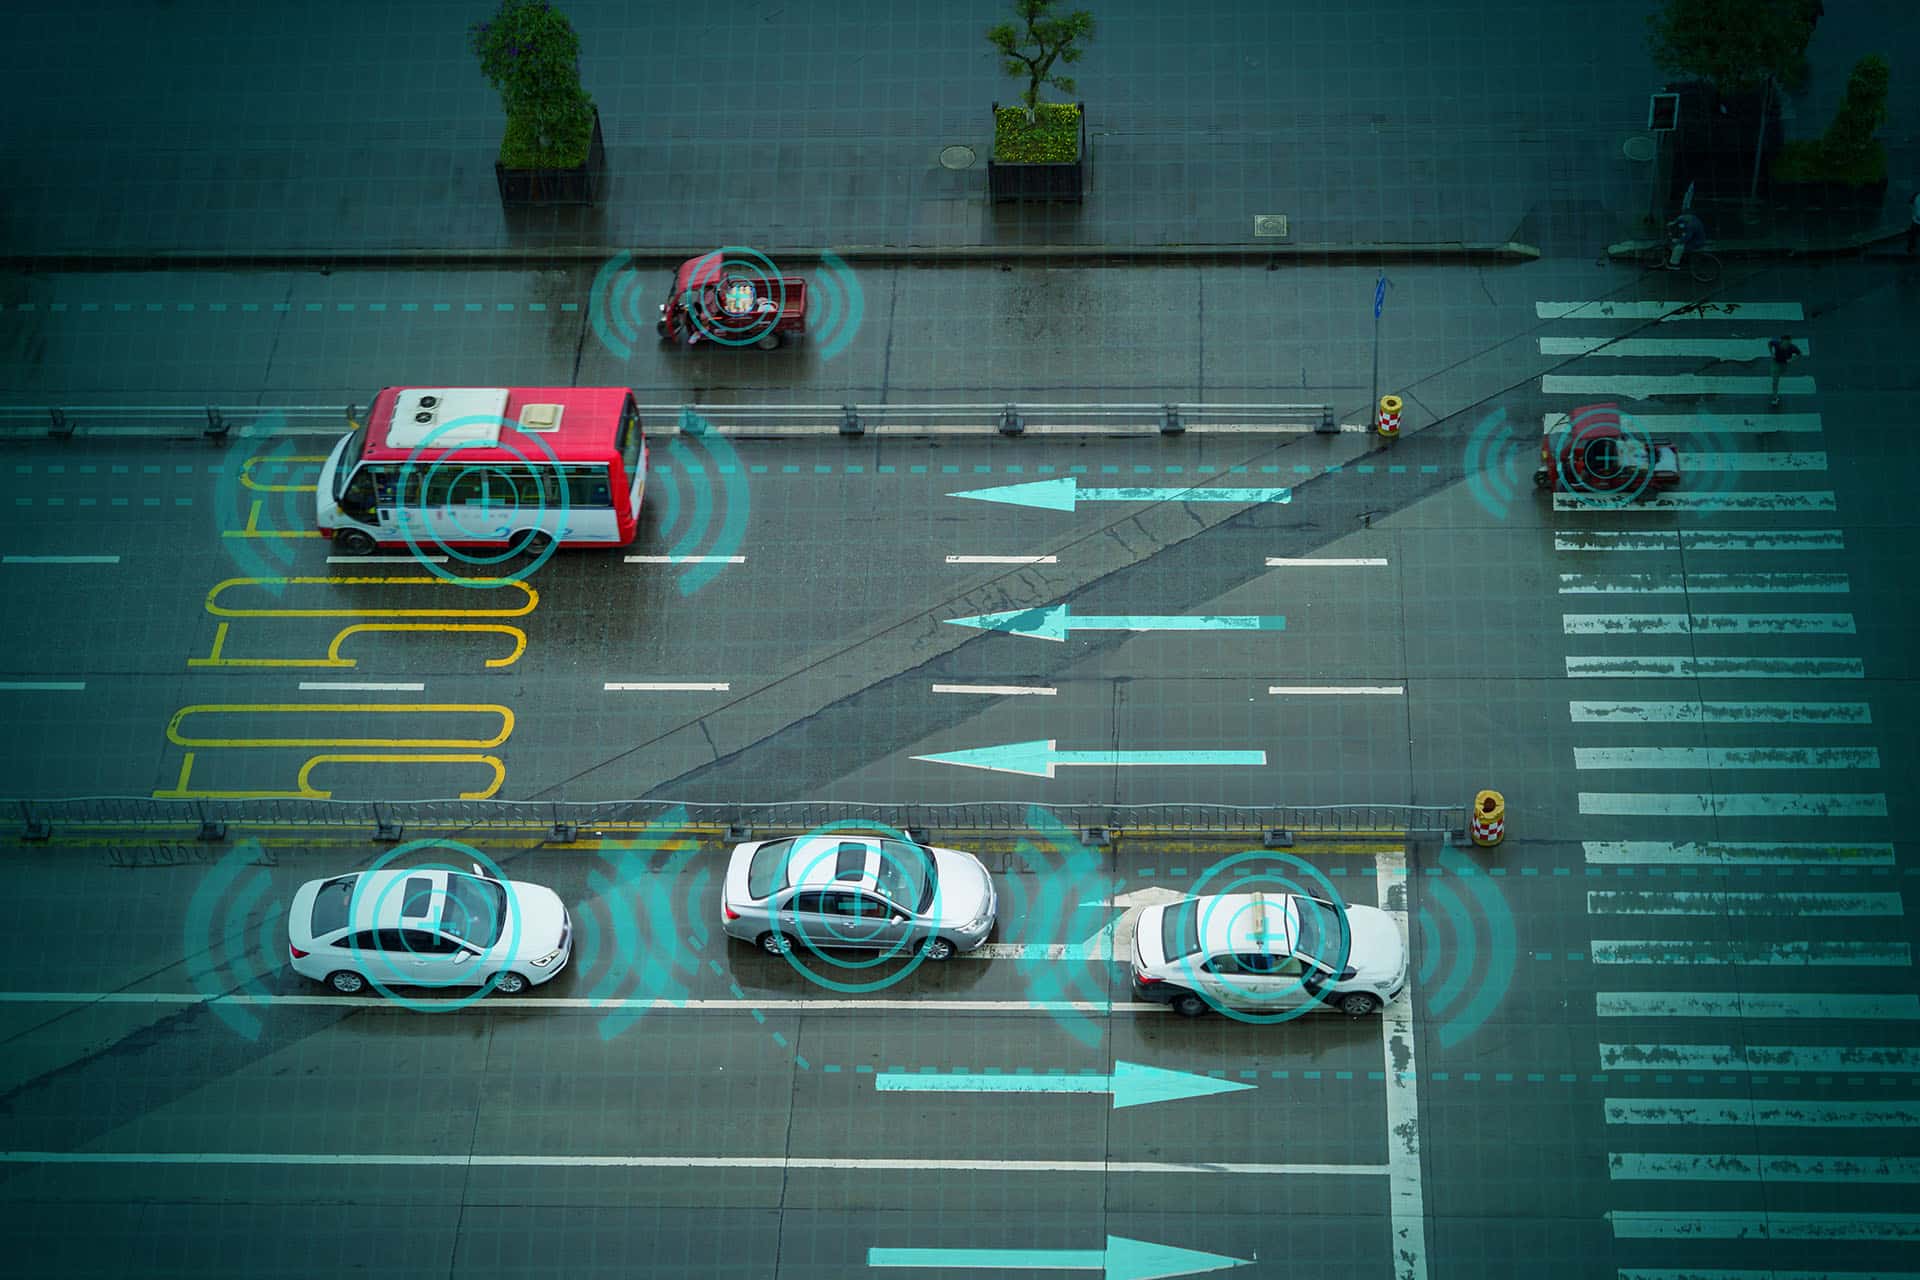 City Council partners with M2M to future-proof traffic network